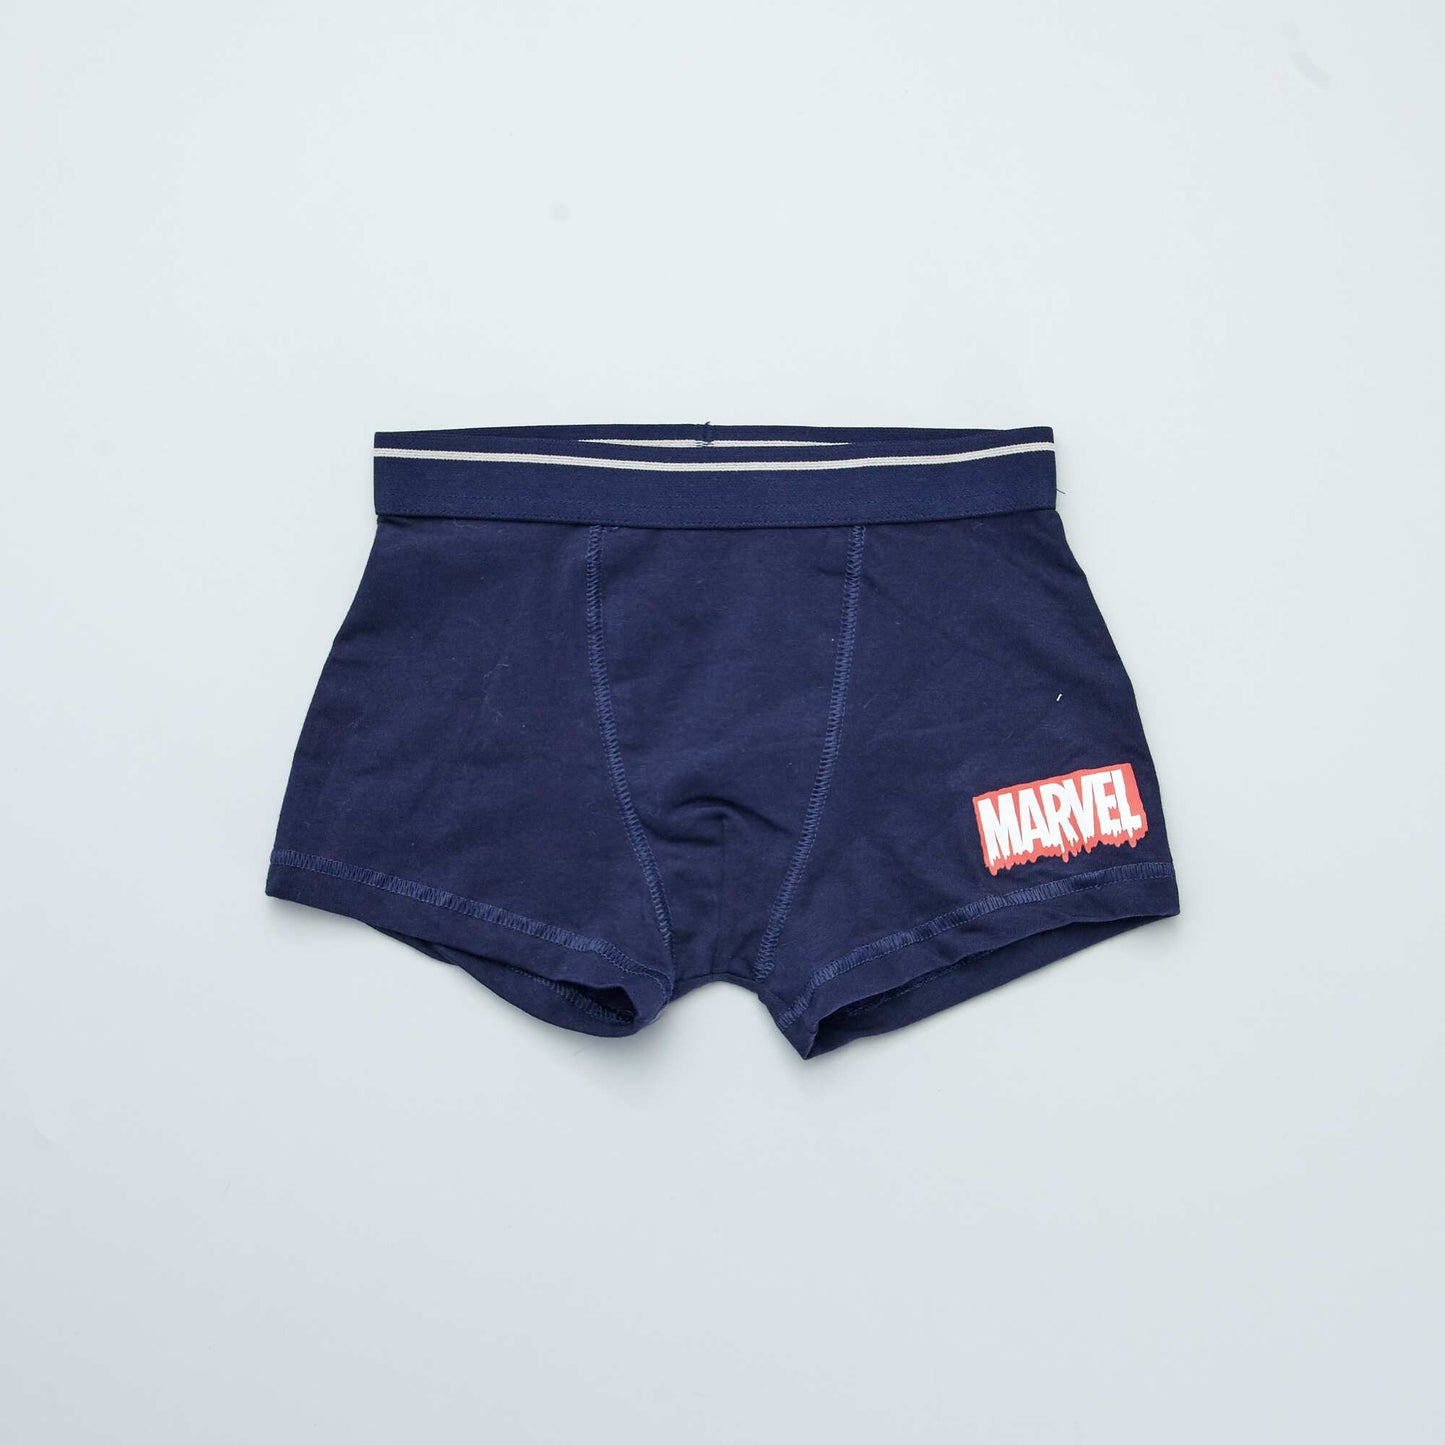 Pack of 2 pairs of Marvel boxers BEIGE